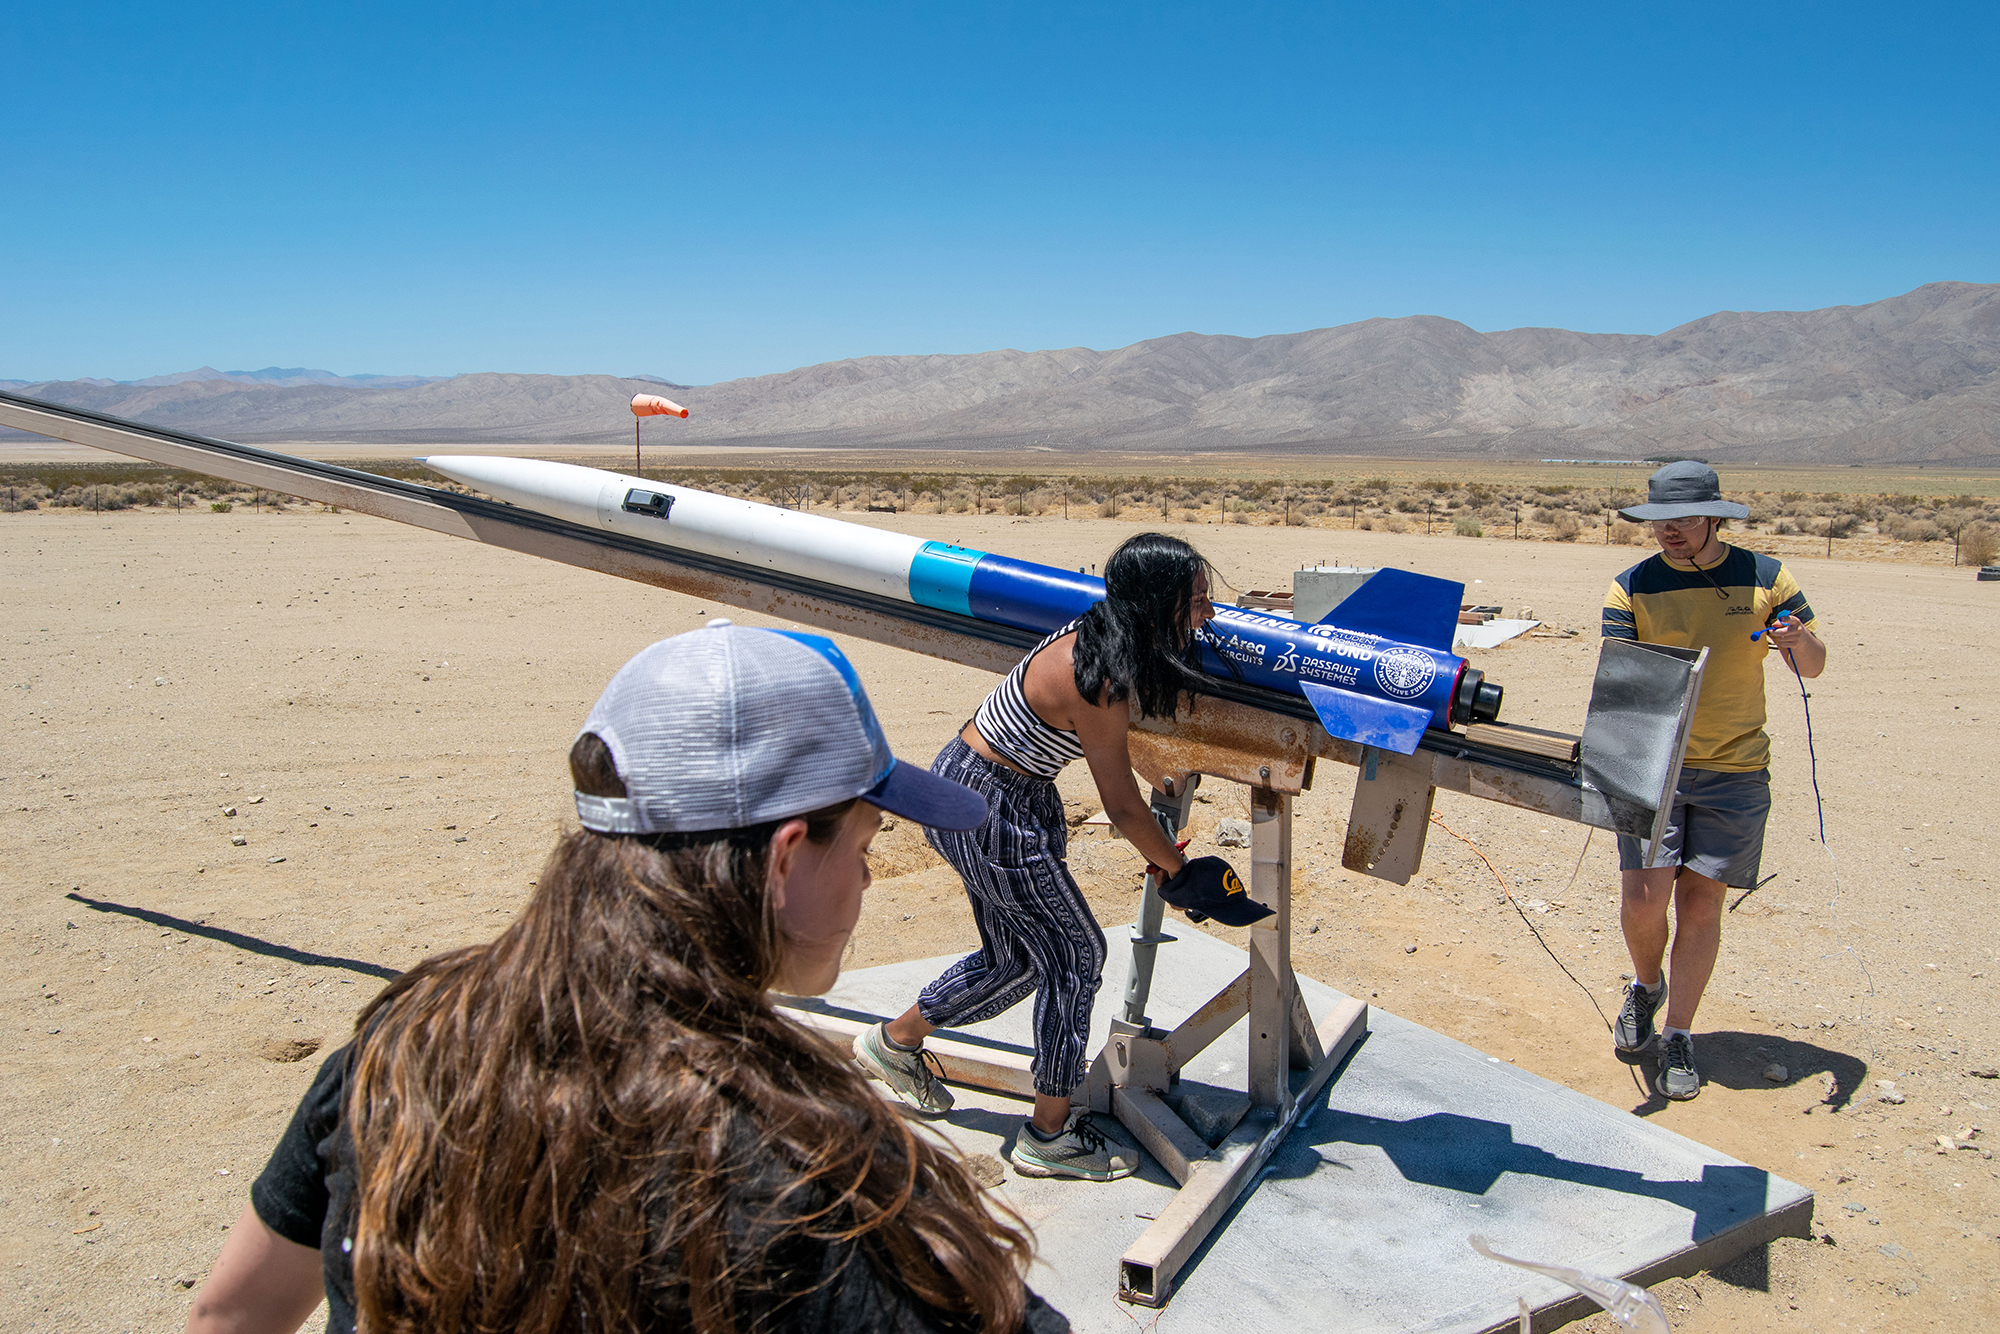 Students working on a rocket in a desert